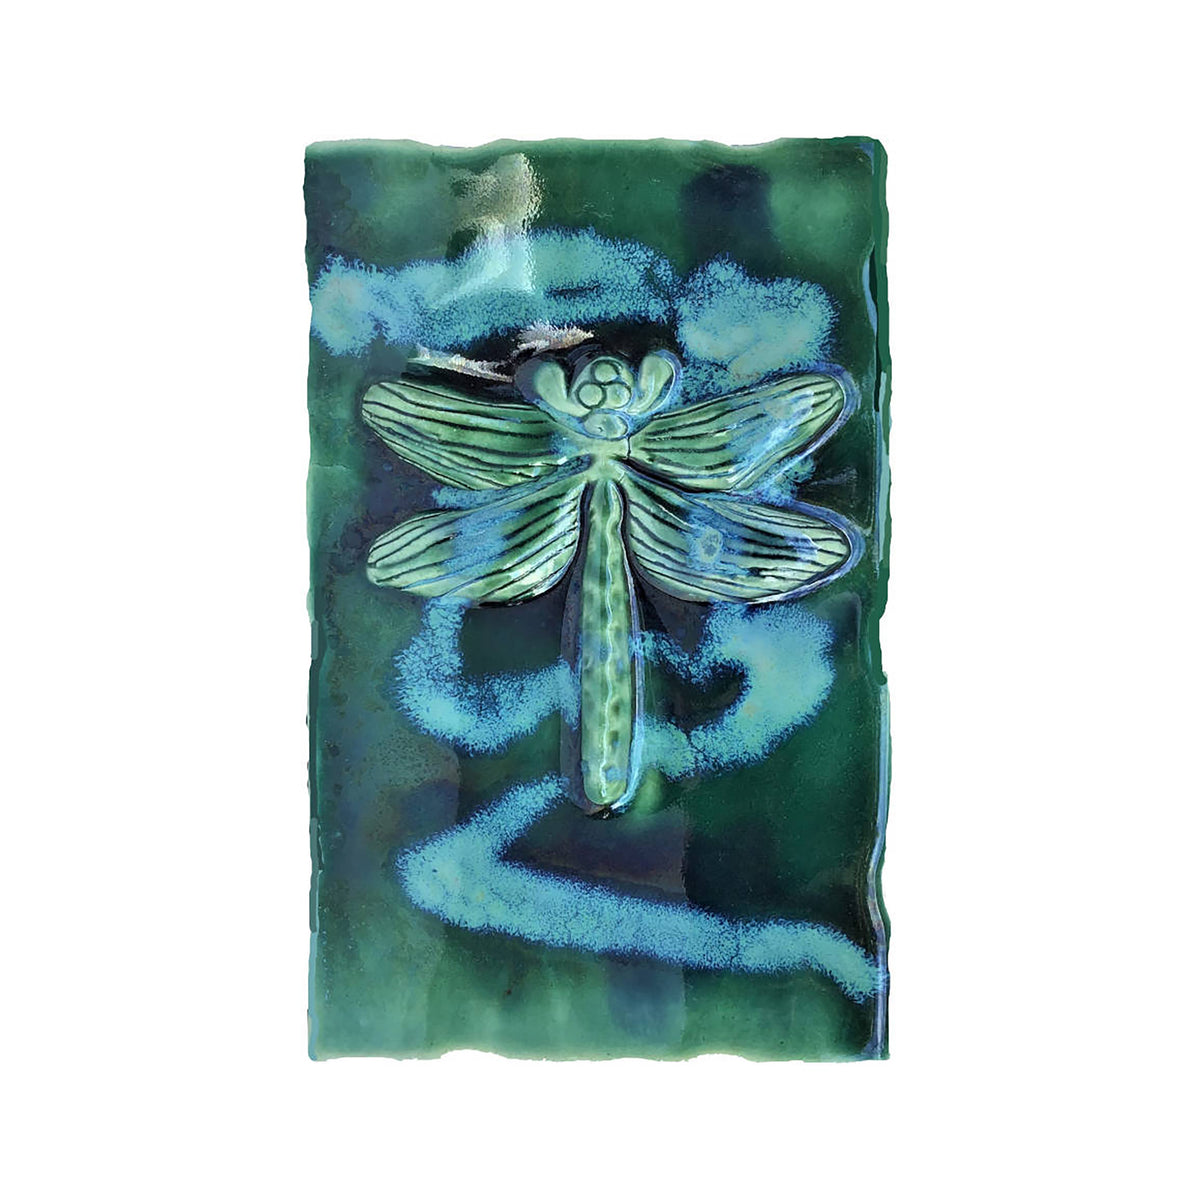 Ceramic Dragonfly Tiles, decorative dragonfly artwork, dragonfly bathroom shower tiles, dragonfly kitchen wall tiles